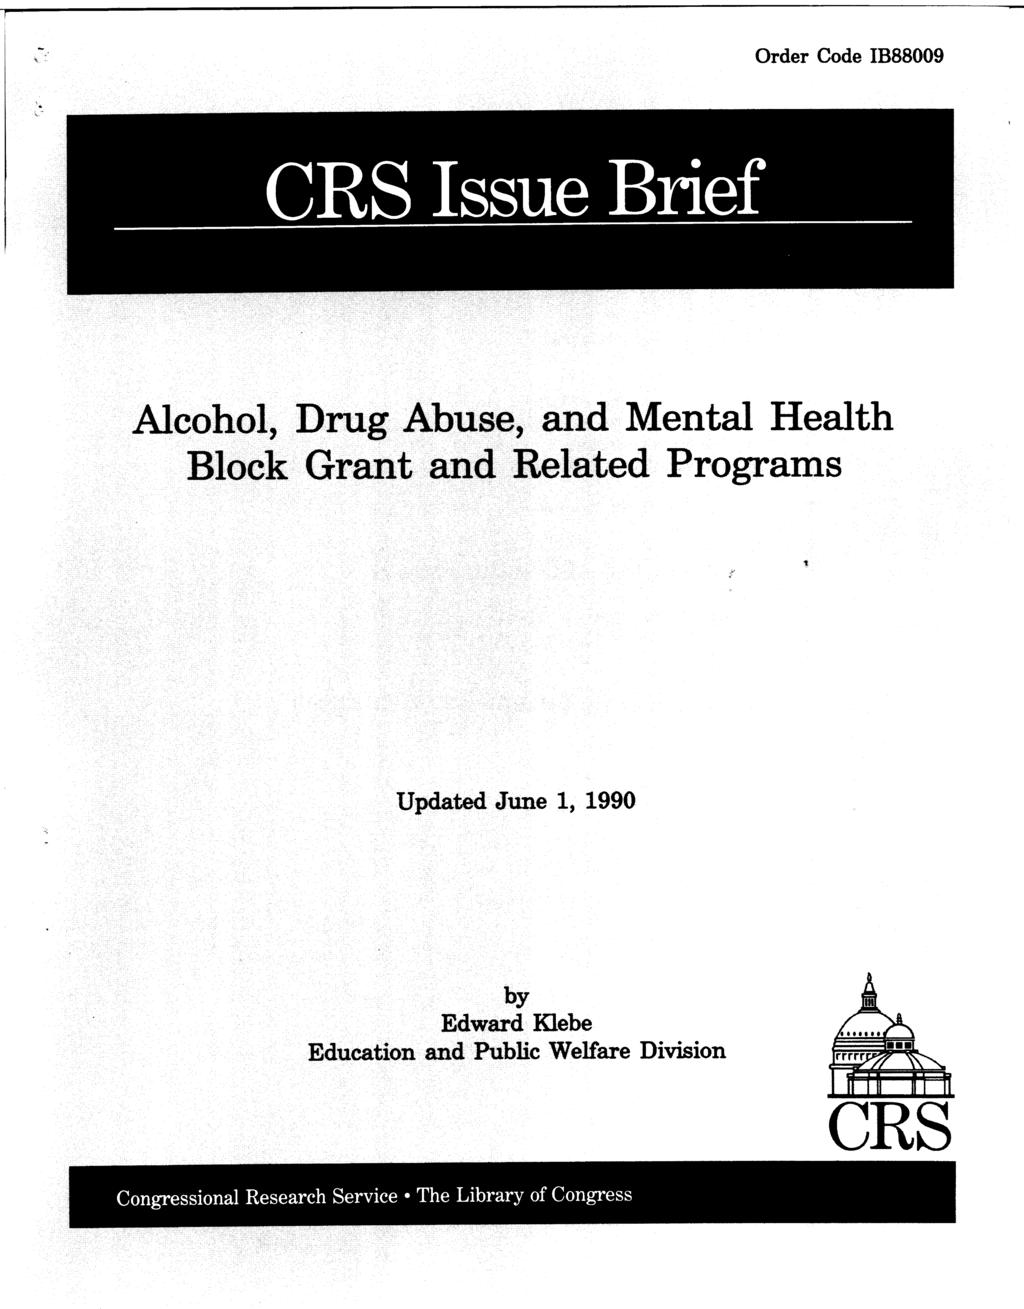 Order Code IB88009 CRS Issue Brief Alcohol, Drug Abuse, and Mental Health Block Grant;;^^:;itelated Programs Updated